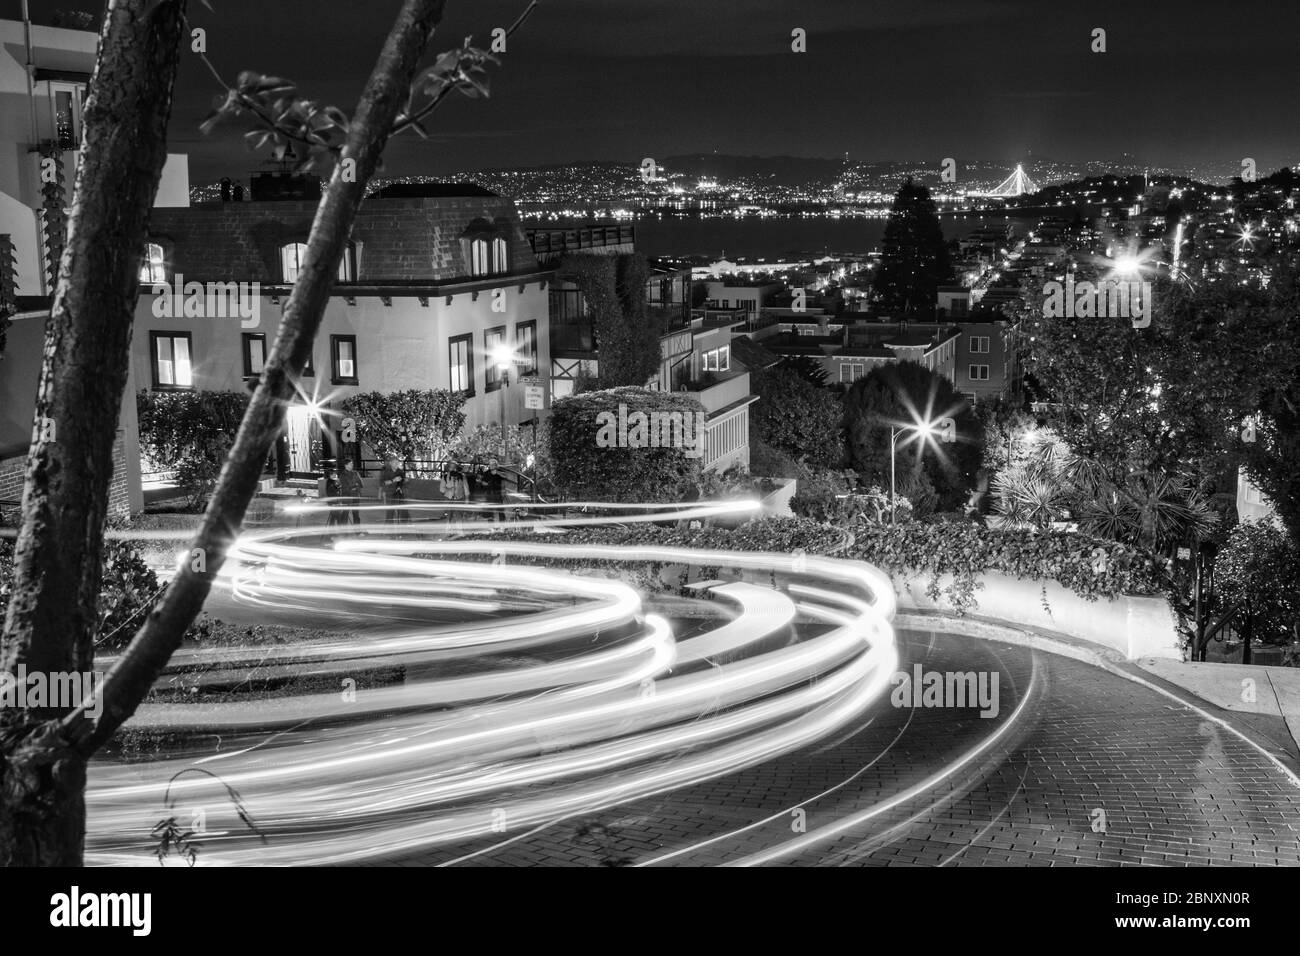 Lombard Street in San Francisco California. Black and white night shot with car light trails. Stock Photo